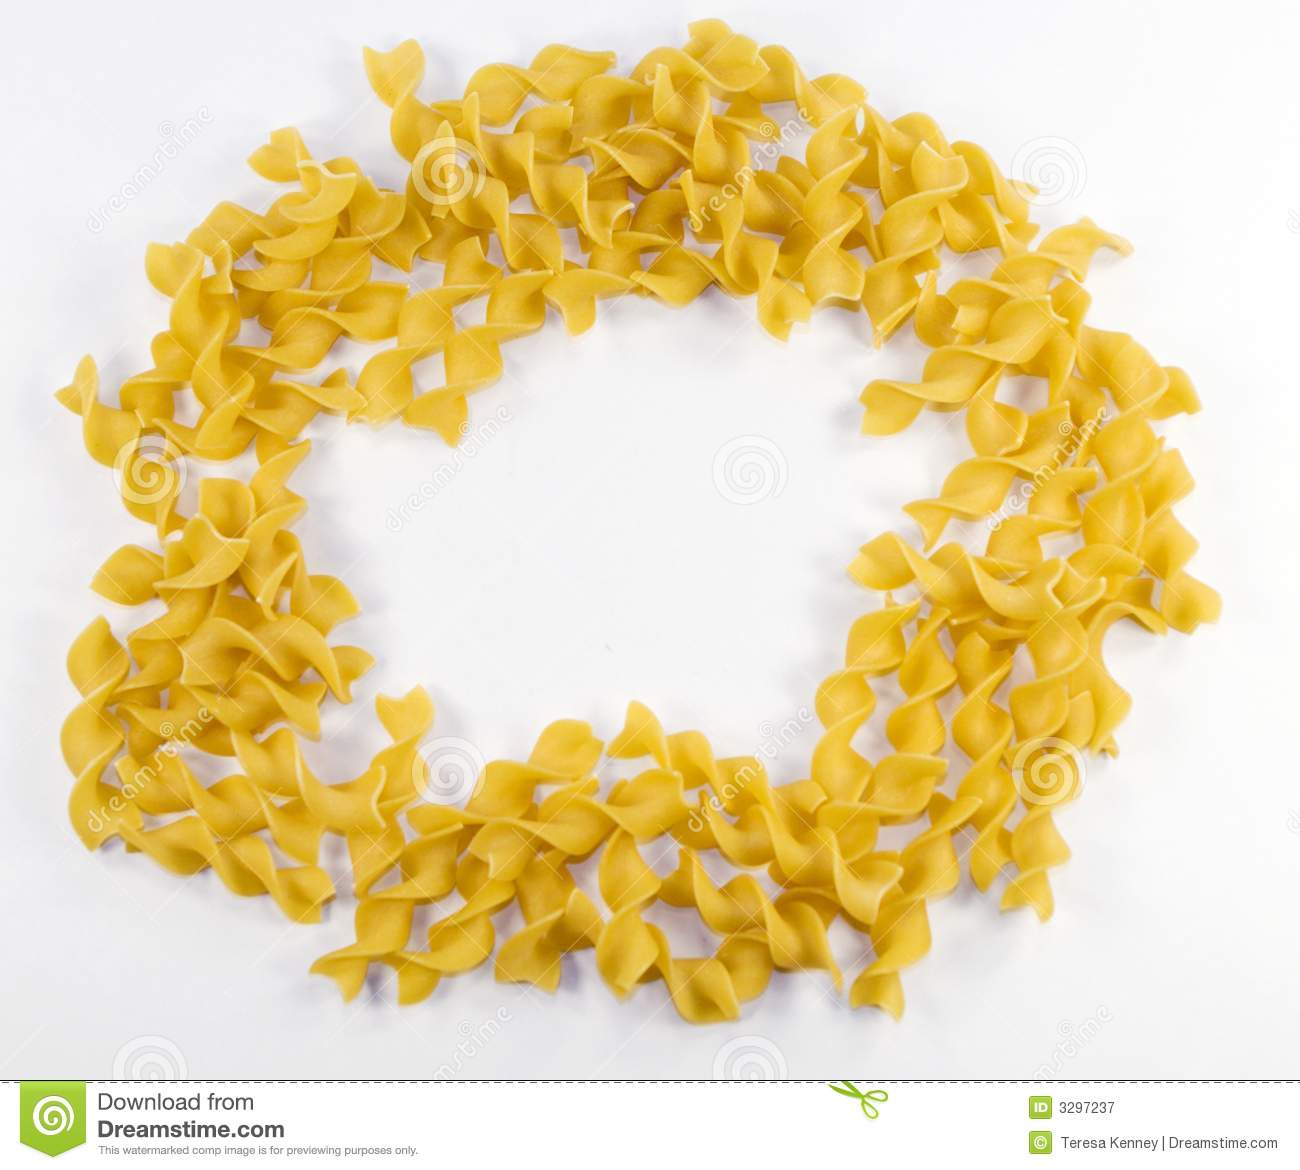 Dried Noodles In Circle Royalty Free Stock Photography   Image    